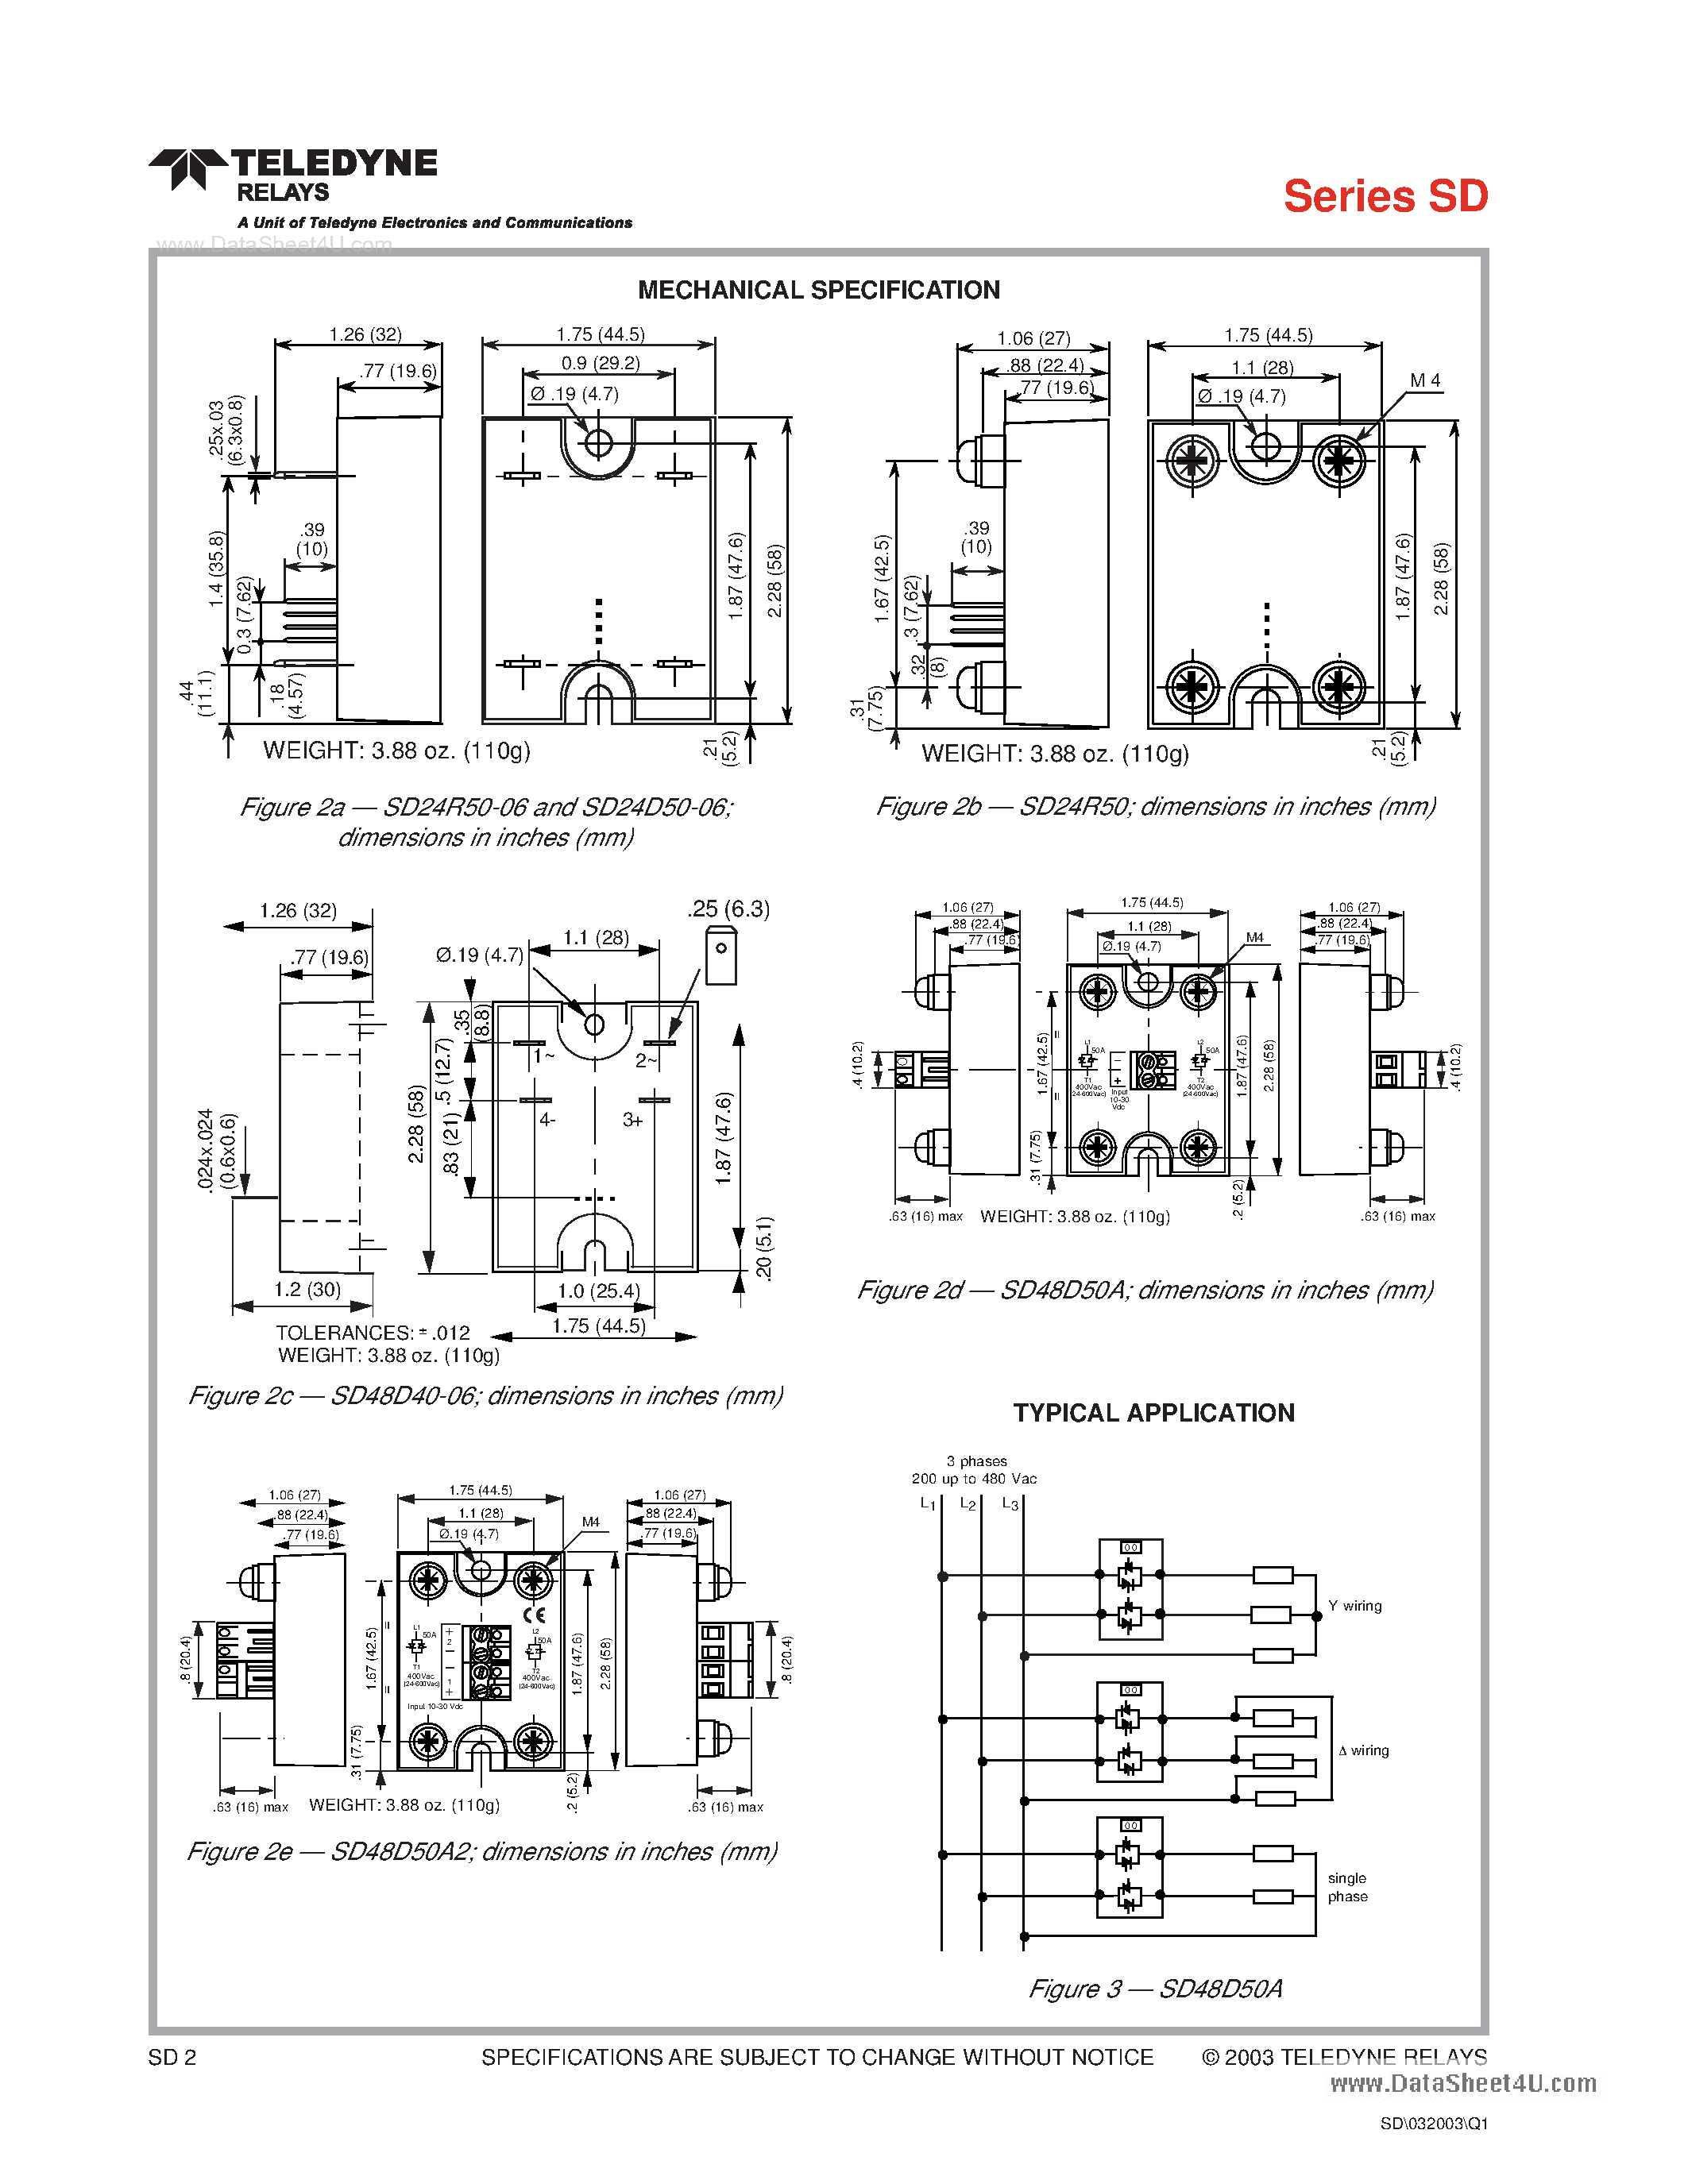 Datasheet SD24D50-06 - (SD24Dxx) Dual Output to 50A 600 Vac DC Control page 2